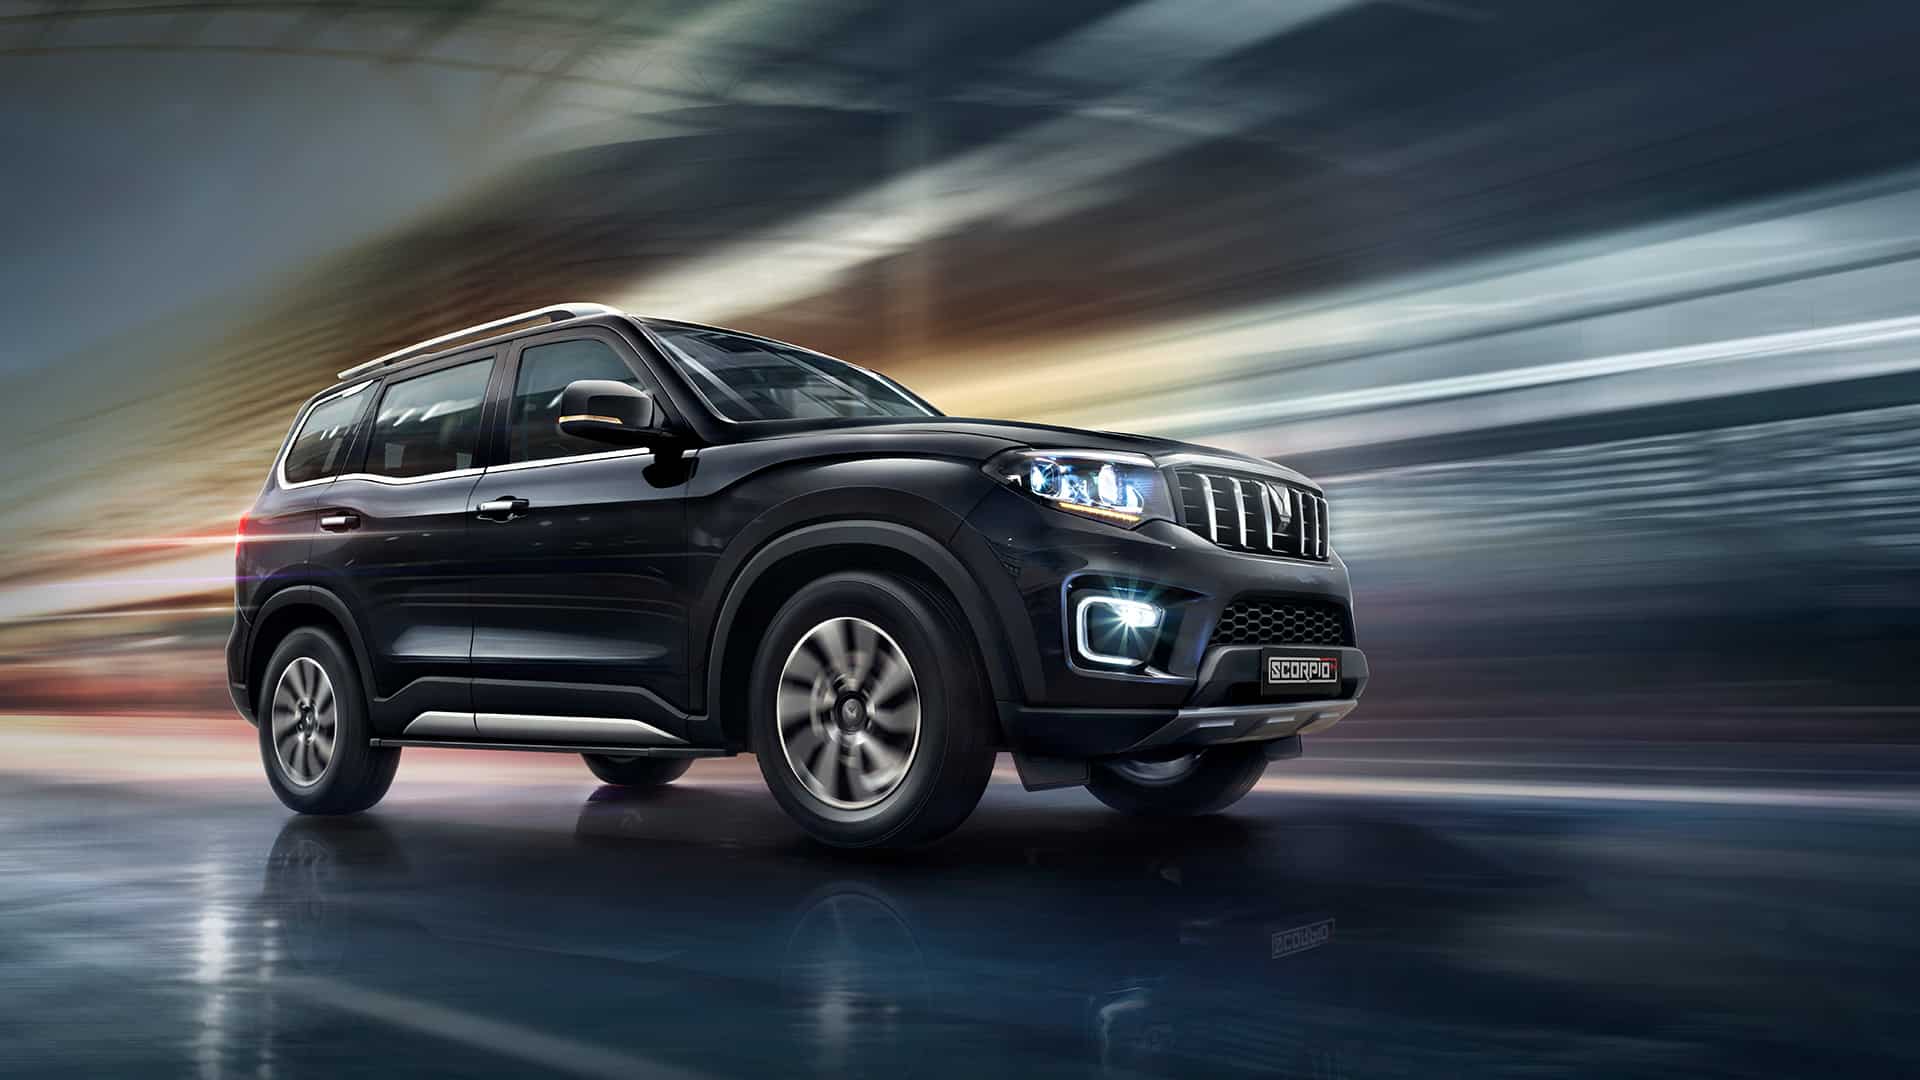 Mahindra Scorpio-N Images in HD: Check interior, exterior, price,  performance, features, and more in detail | Zee Business